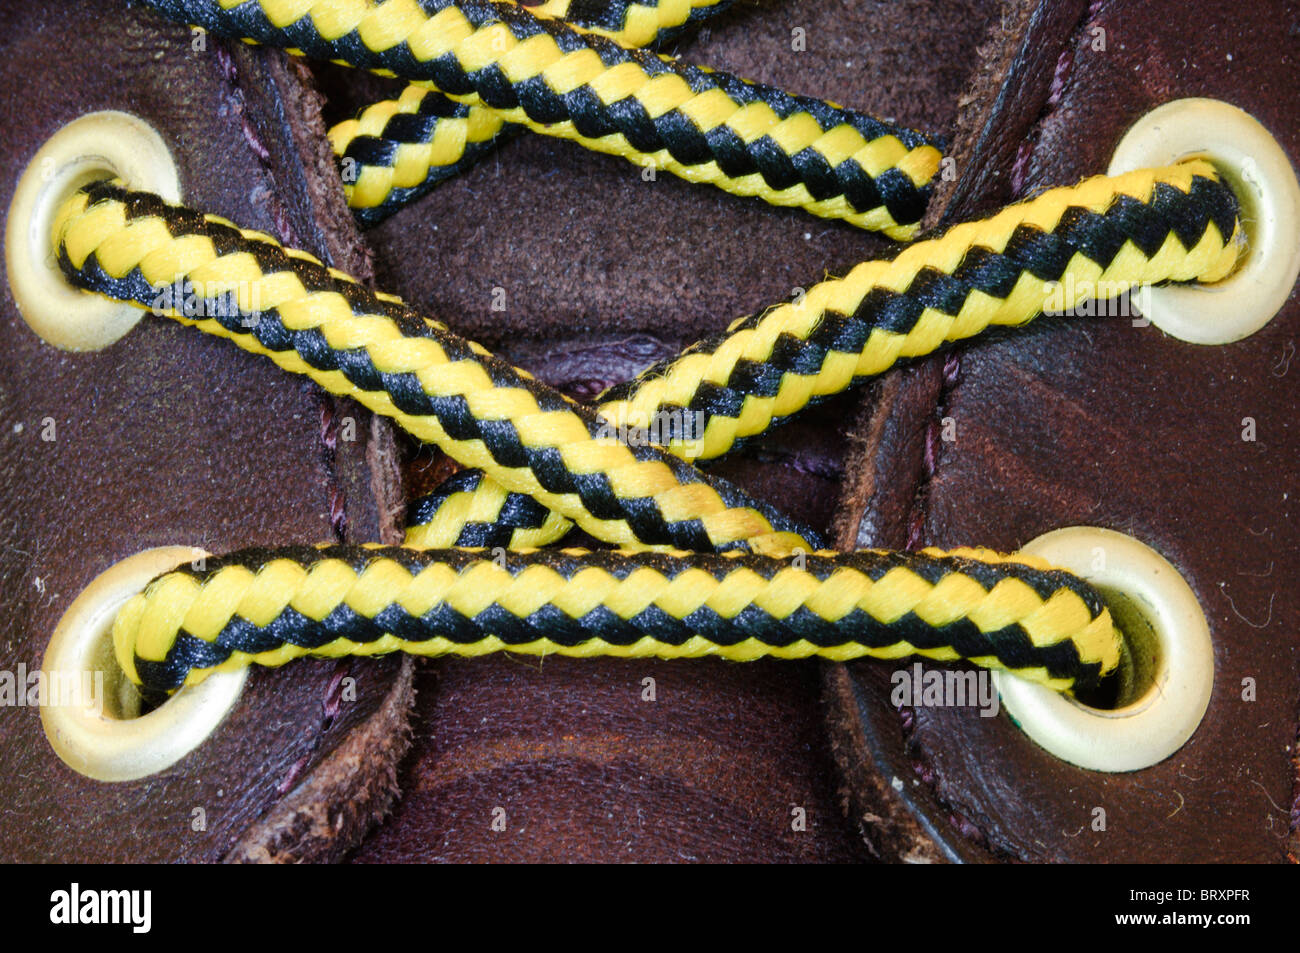 A close-up photograph of the laces on a pair of walking boots Stock Photo